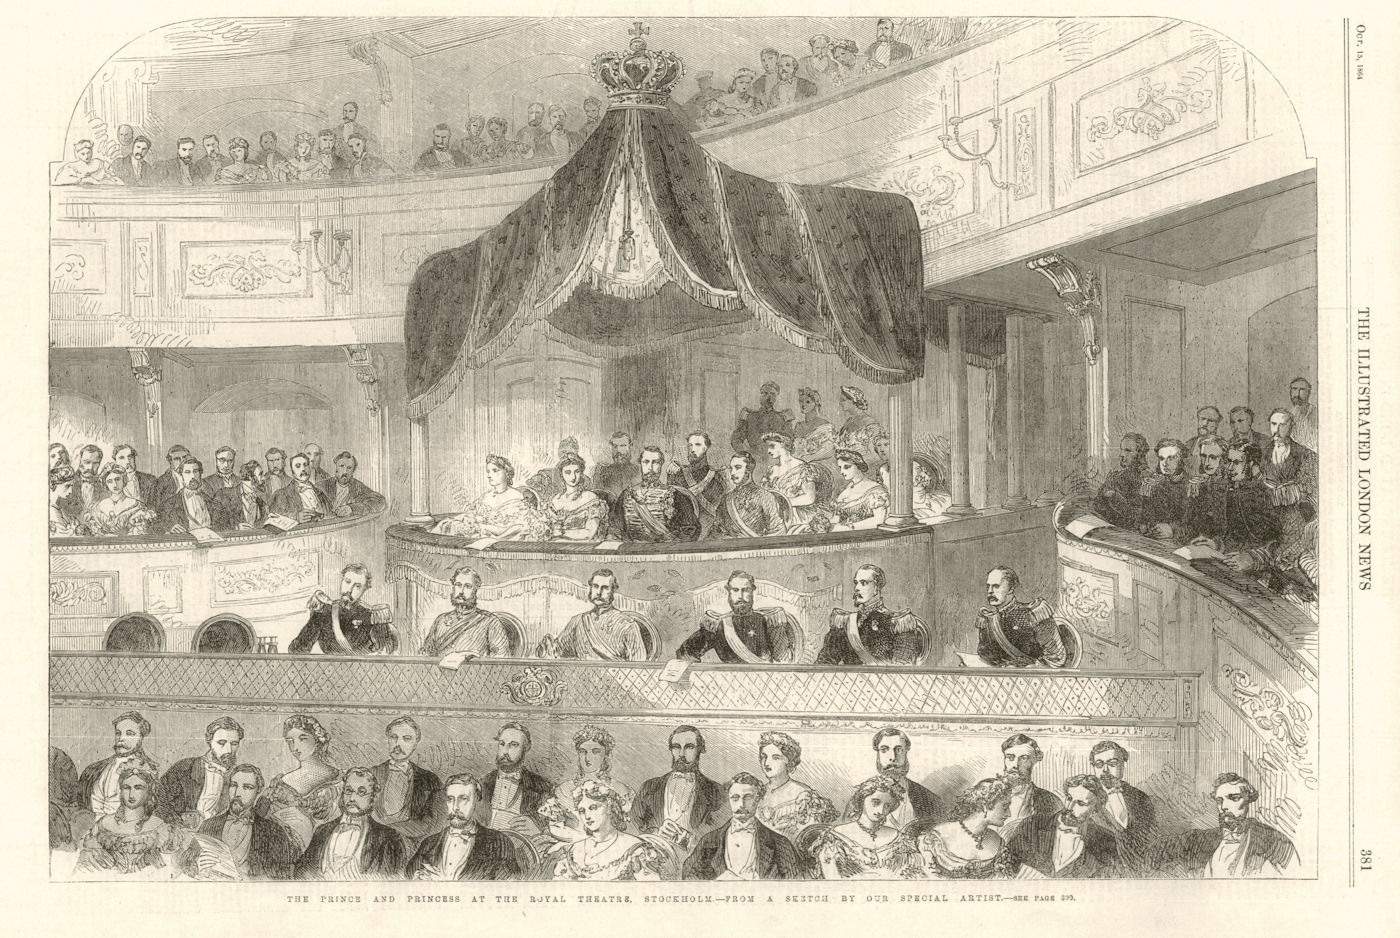 The Prince & Princess at the Royal Dramatic Theatre, Stockholm. Sweden 1864